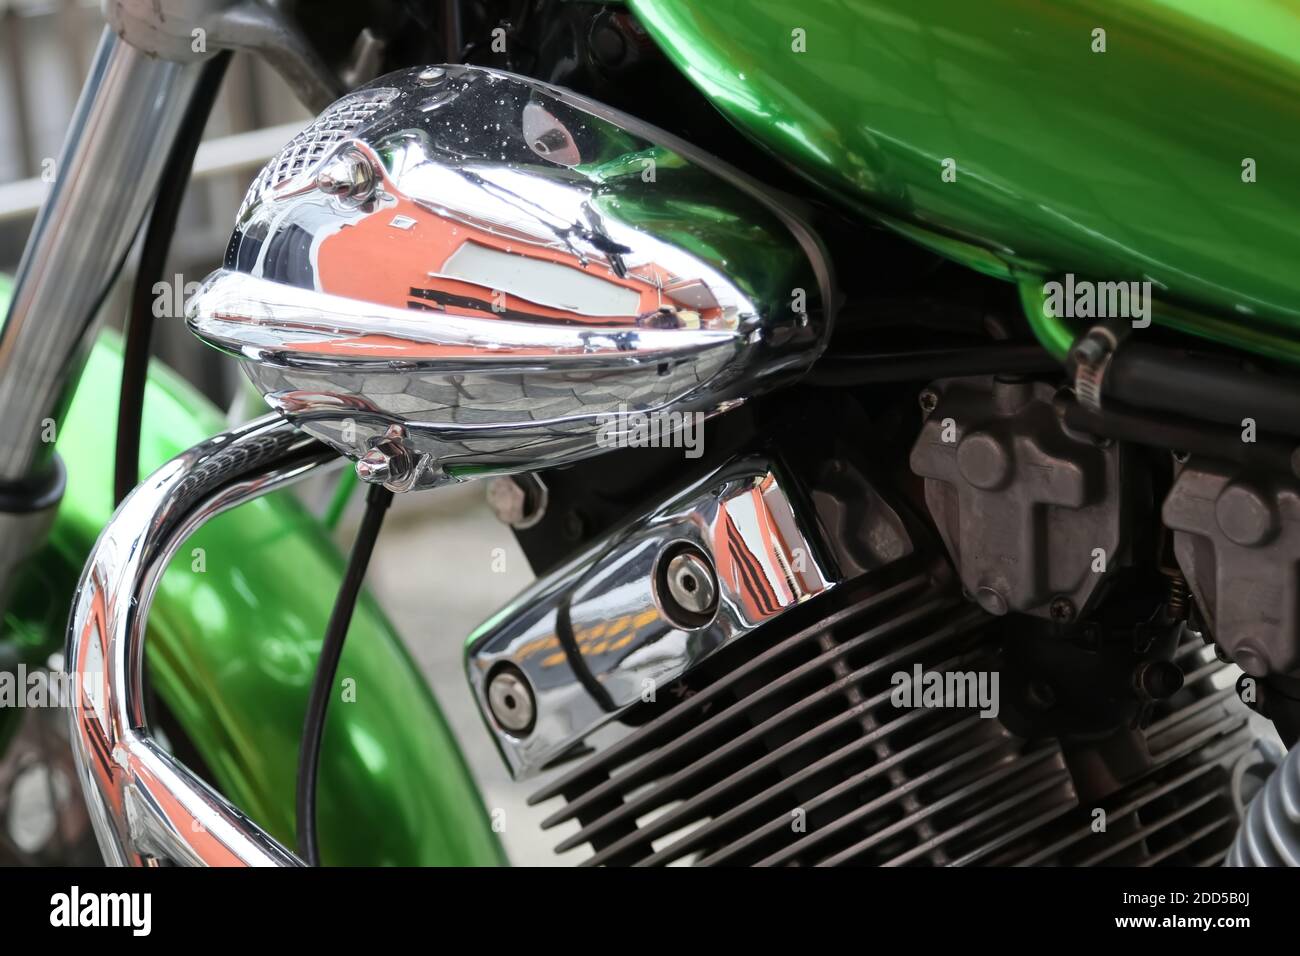 details of a customized motorcycle Stock Photo